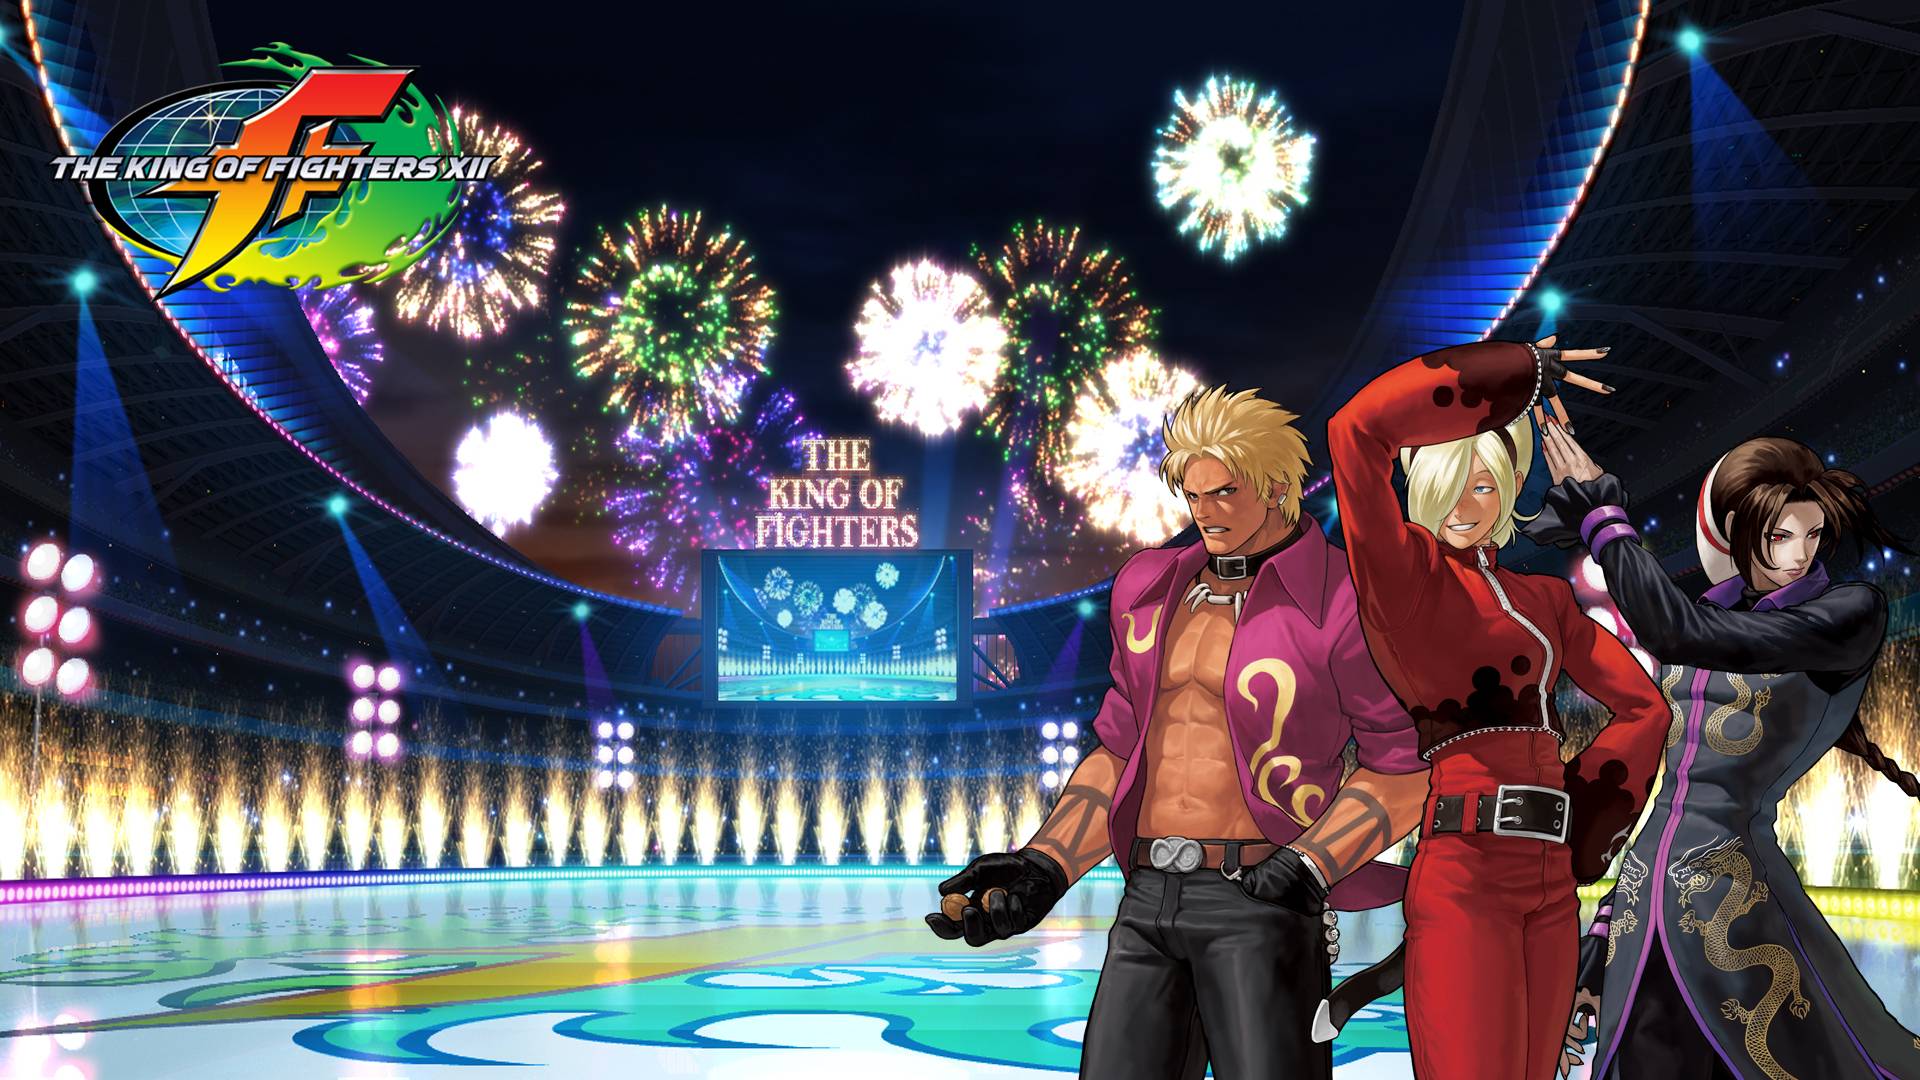 Amazing The King Of Fighters XII Pictures & Backgrounds